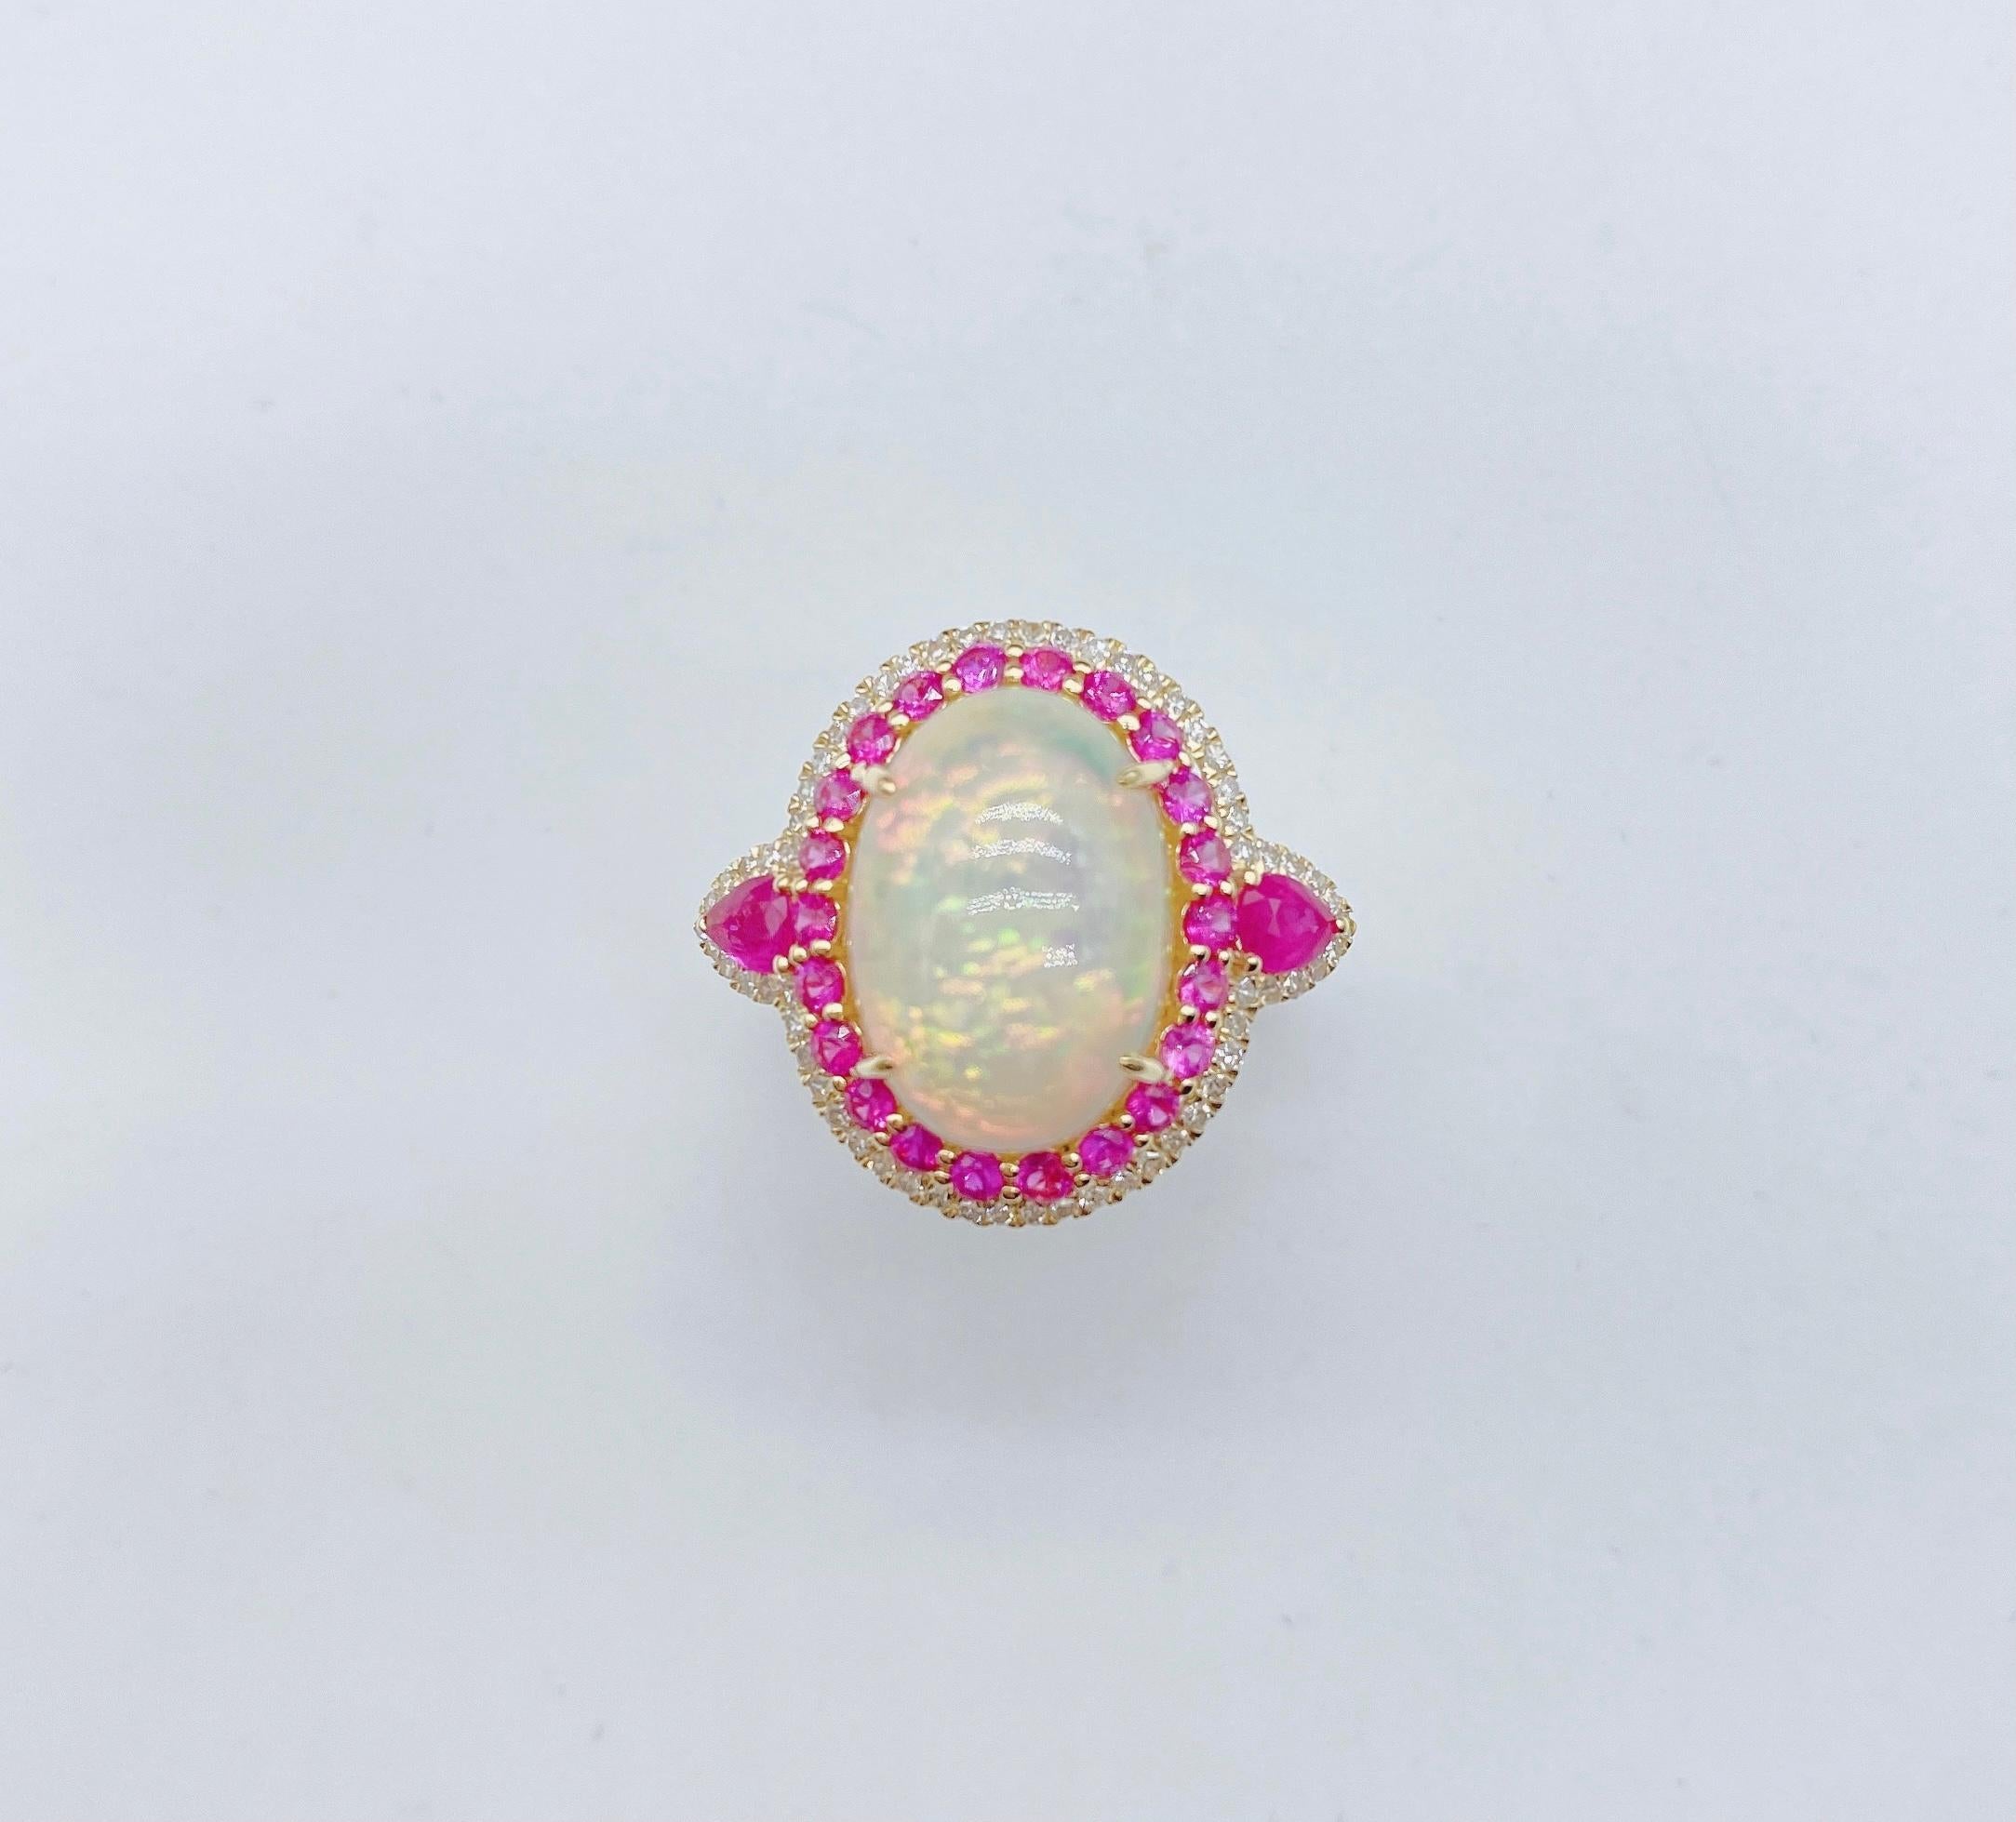 The Following Item we are offering is a Rare Important Radiant 18KT Gold Large Fancy Fiery White Opal Diamond Ruby Ring. Ring is comprised of A LARGE Gorgeous Fancy Fiery White Opal surrounded by a Beautiful Halo of Glittering Diamonds and Rubies